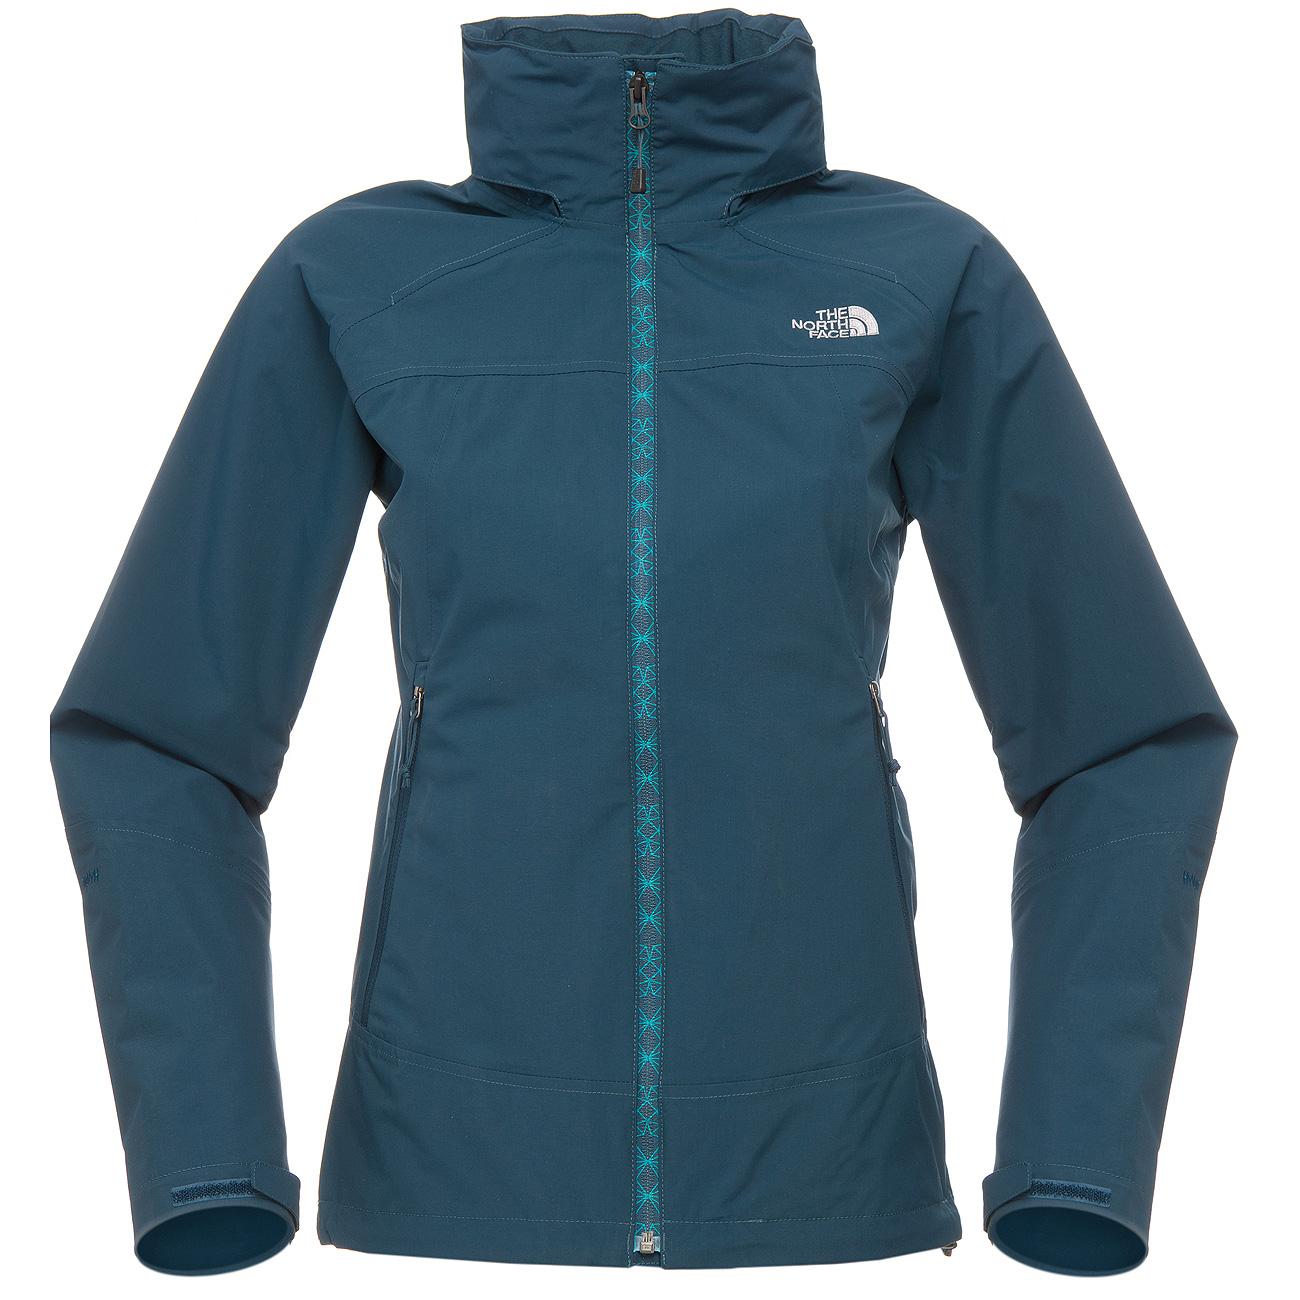 Foto Chaqueta impermeable The North Face Stratos azul para mujer , xs